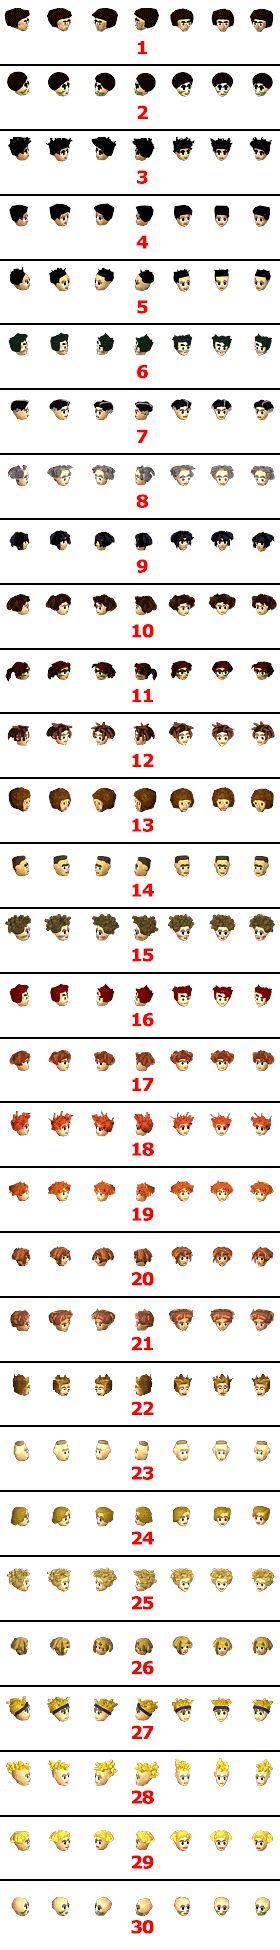 3567-male_heads.png